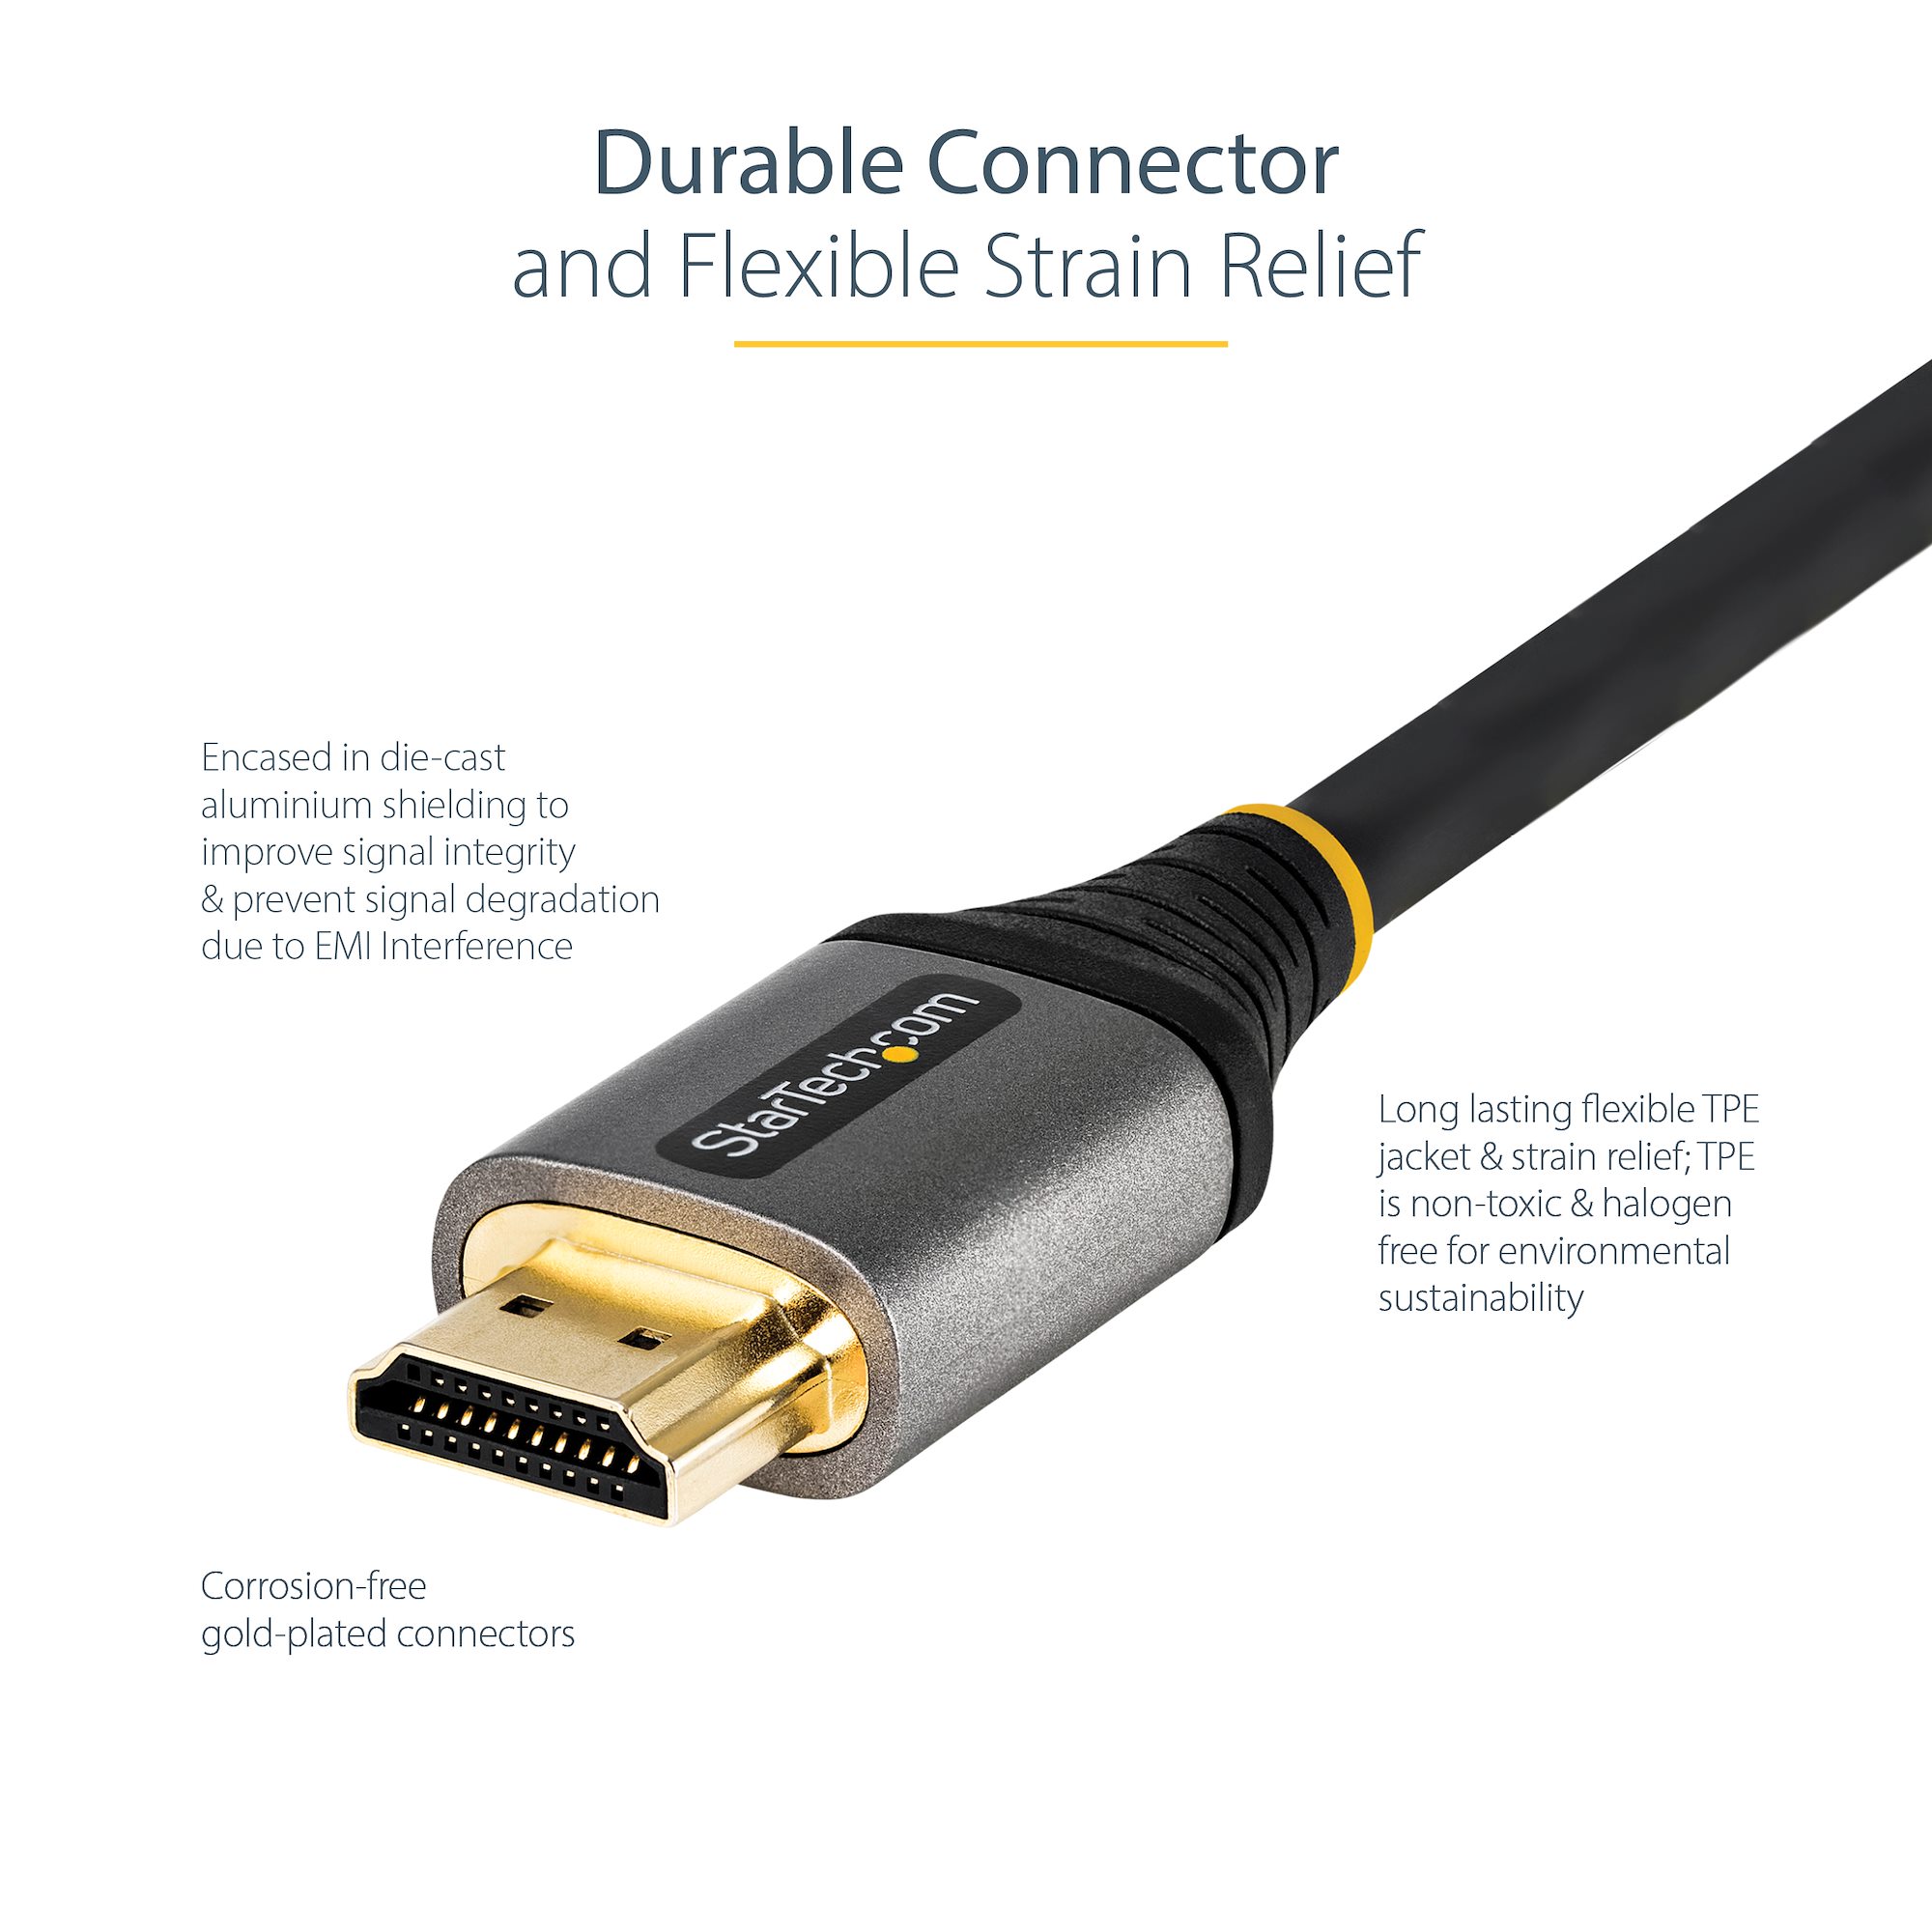 Certified HDMI 2.1 cable 4K 120Hz 3M 2M 4K 120Hz cable HDMI 2.1